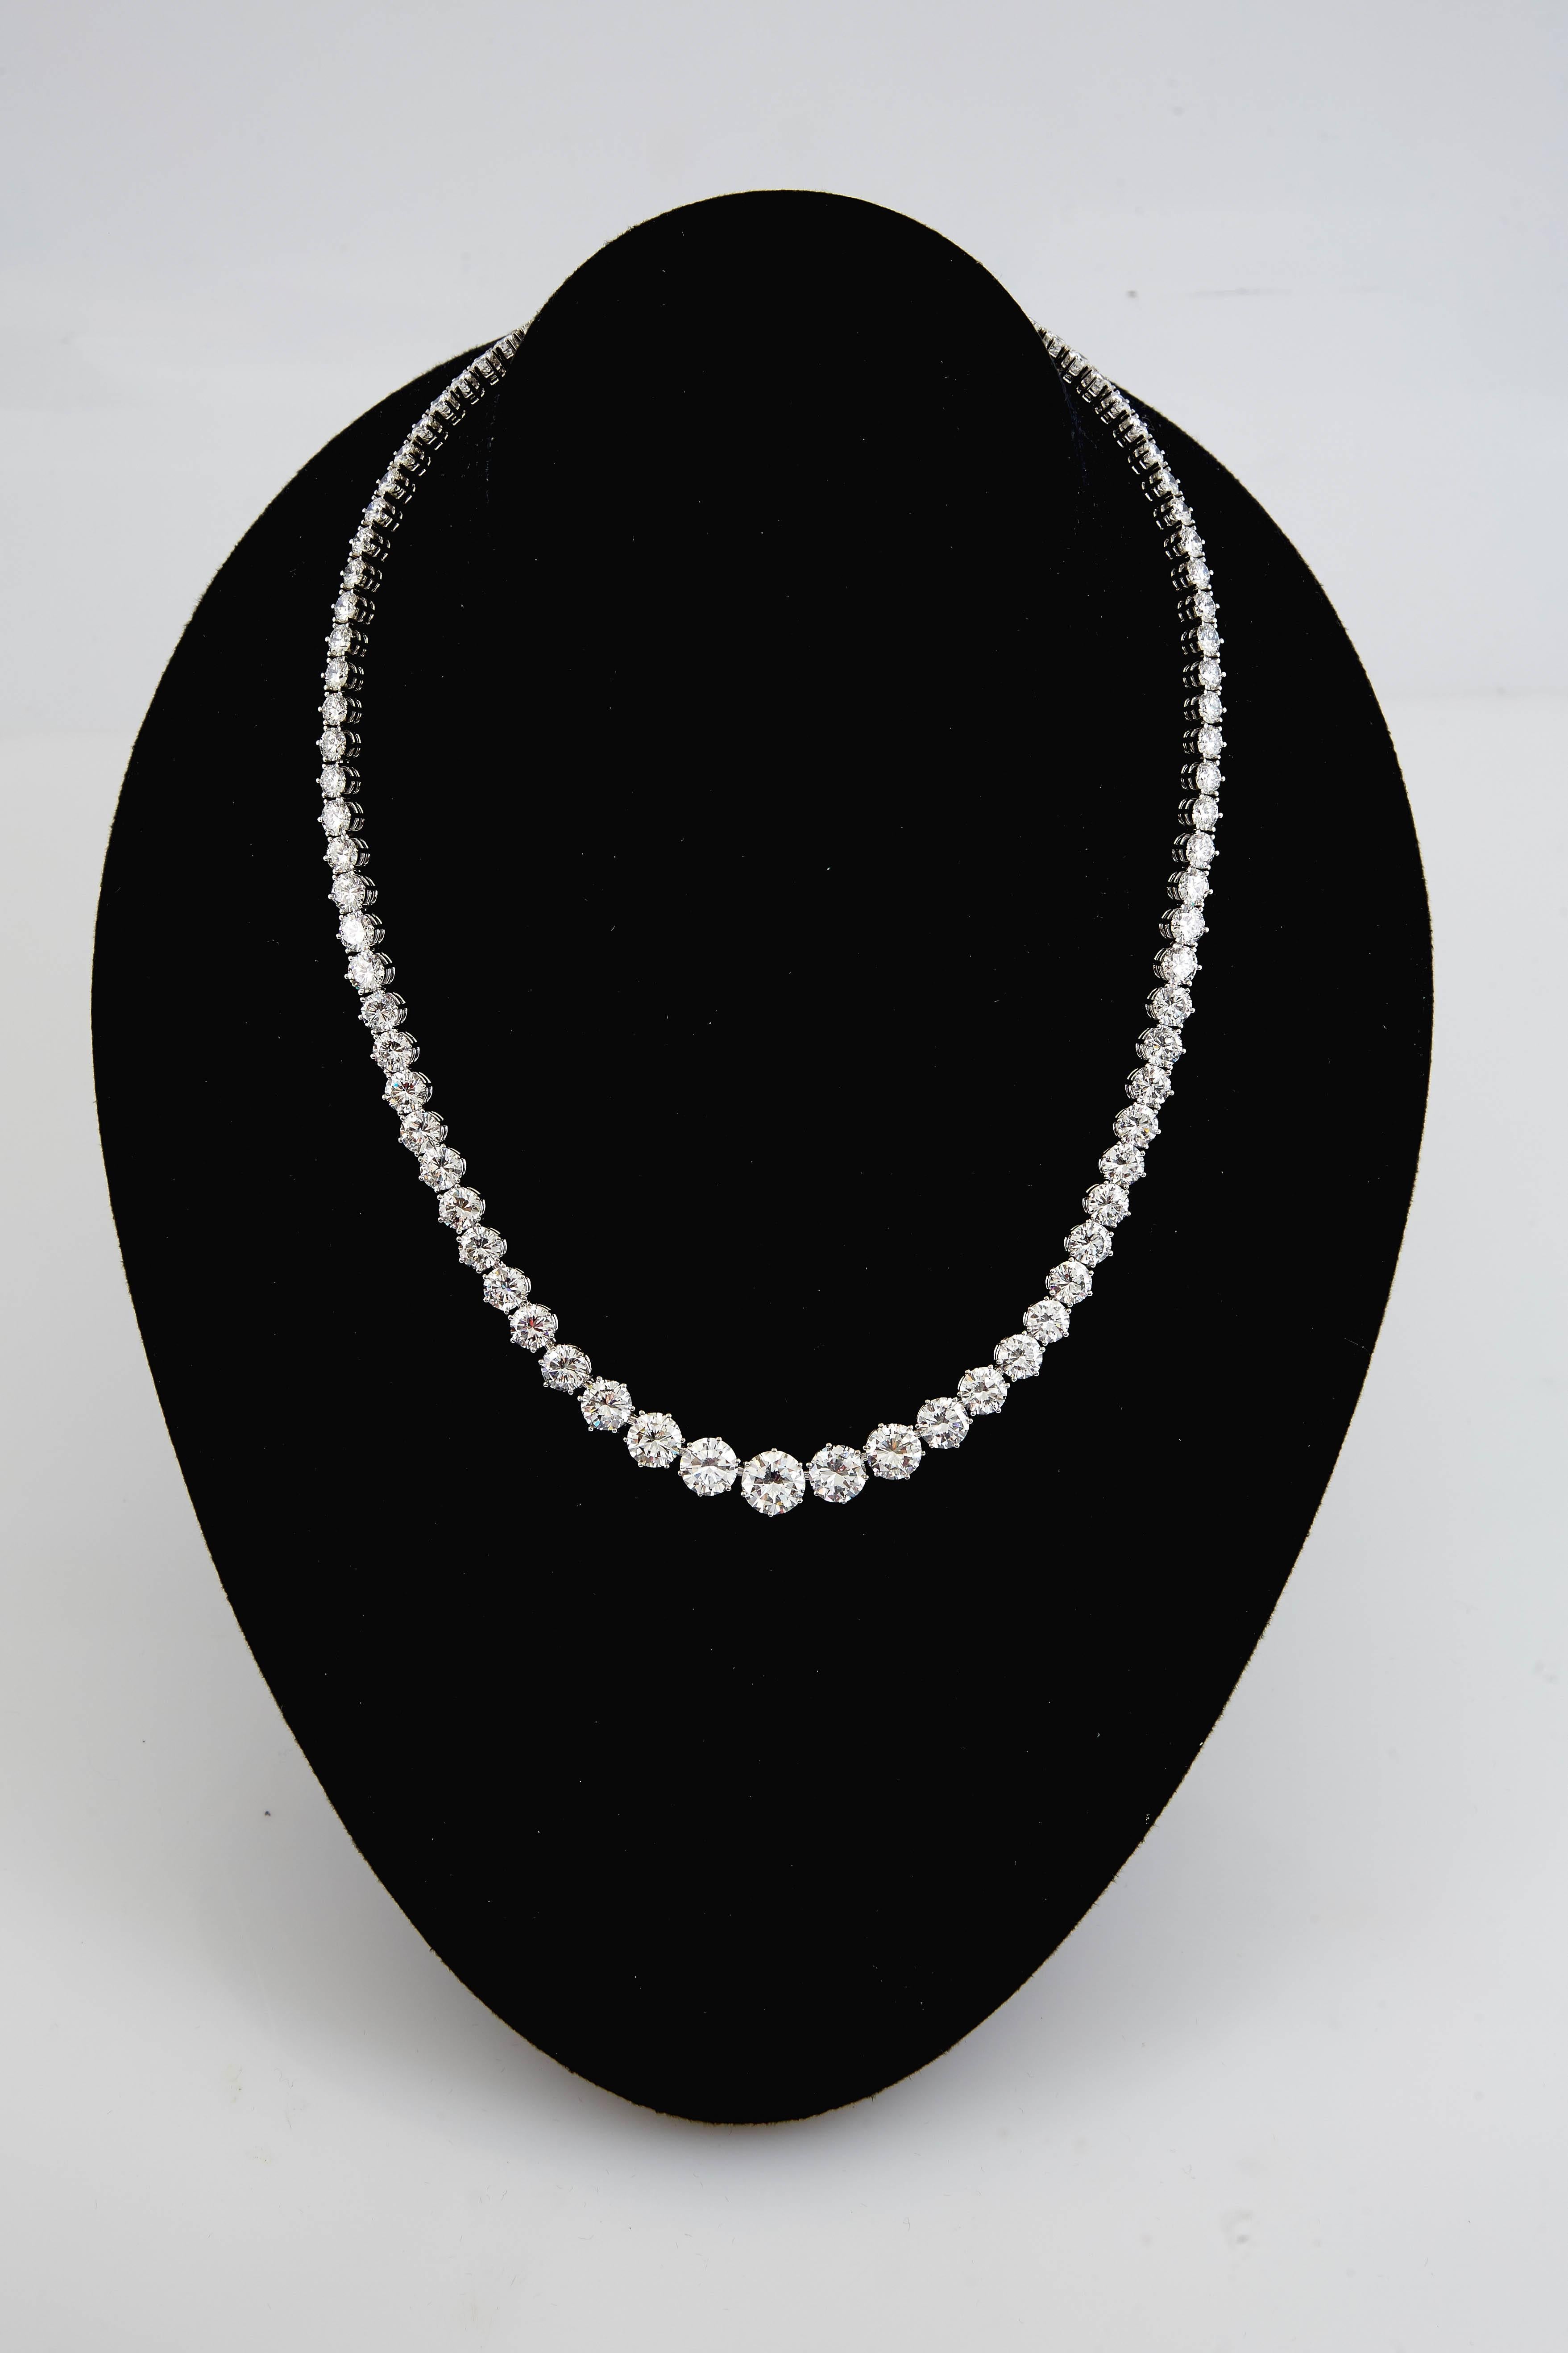 A traditional and an elegant necklace is finely crafted in platinum with 41.00 carat of graduating  diamond diamonds. 7 center stones are GIA certified. The center stone is 2.06 ct. F VS1 GIA #2141928028, 1.57 ct.  DVS1 GIA #114692391, 1.50 ct.